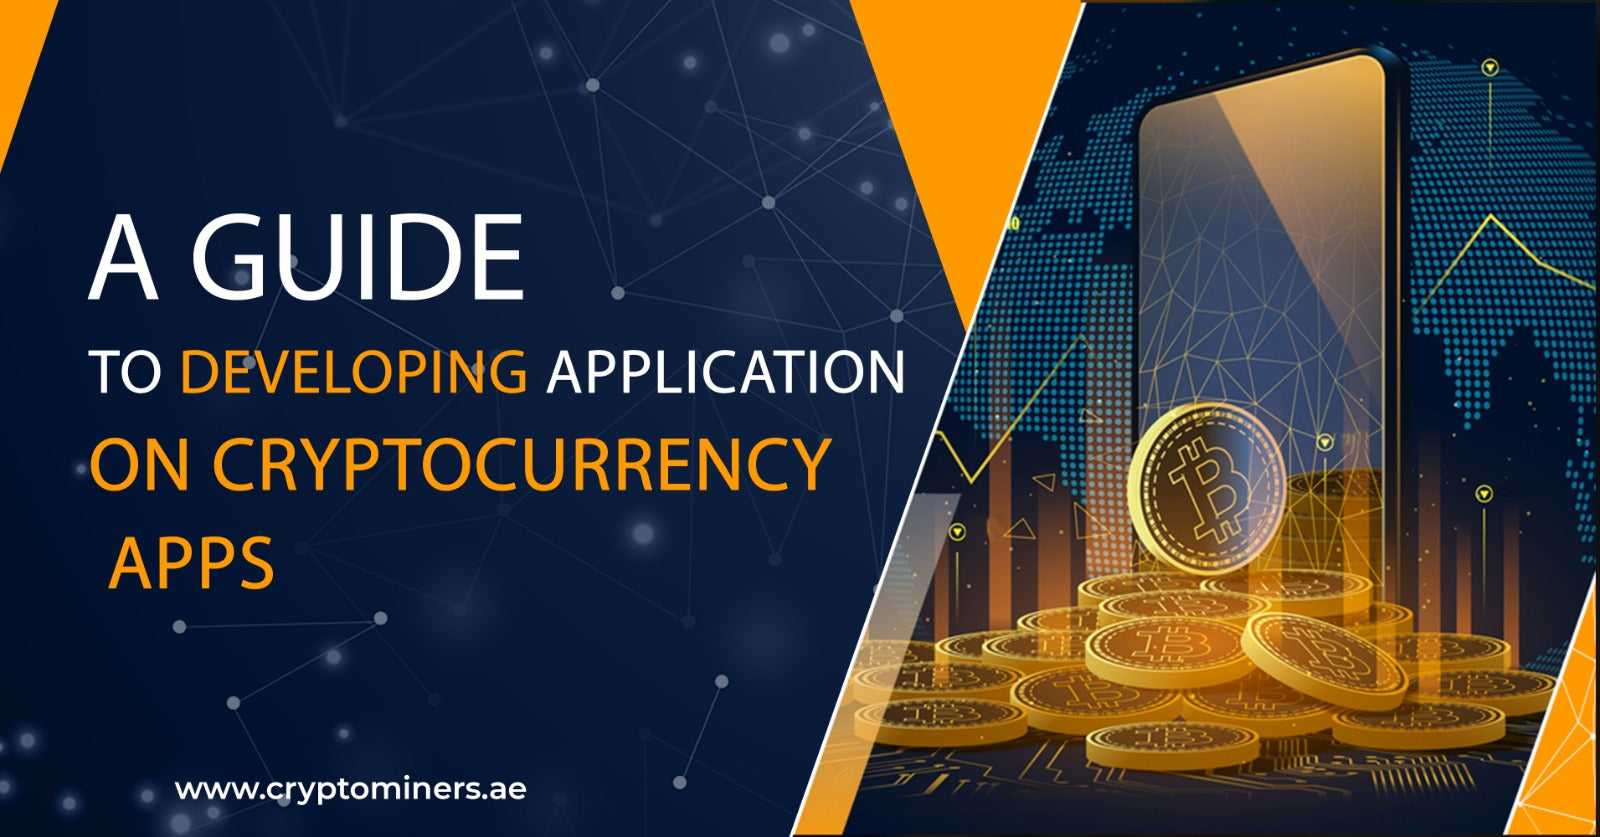 A guide to developing applications on cryptocurrency apps